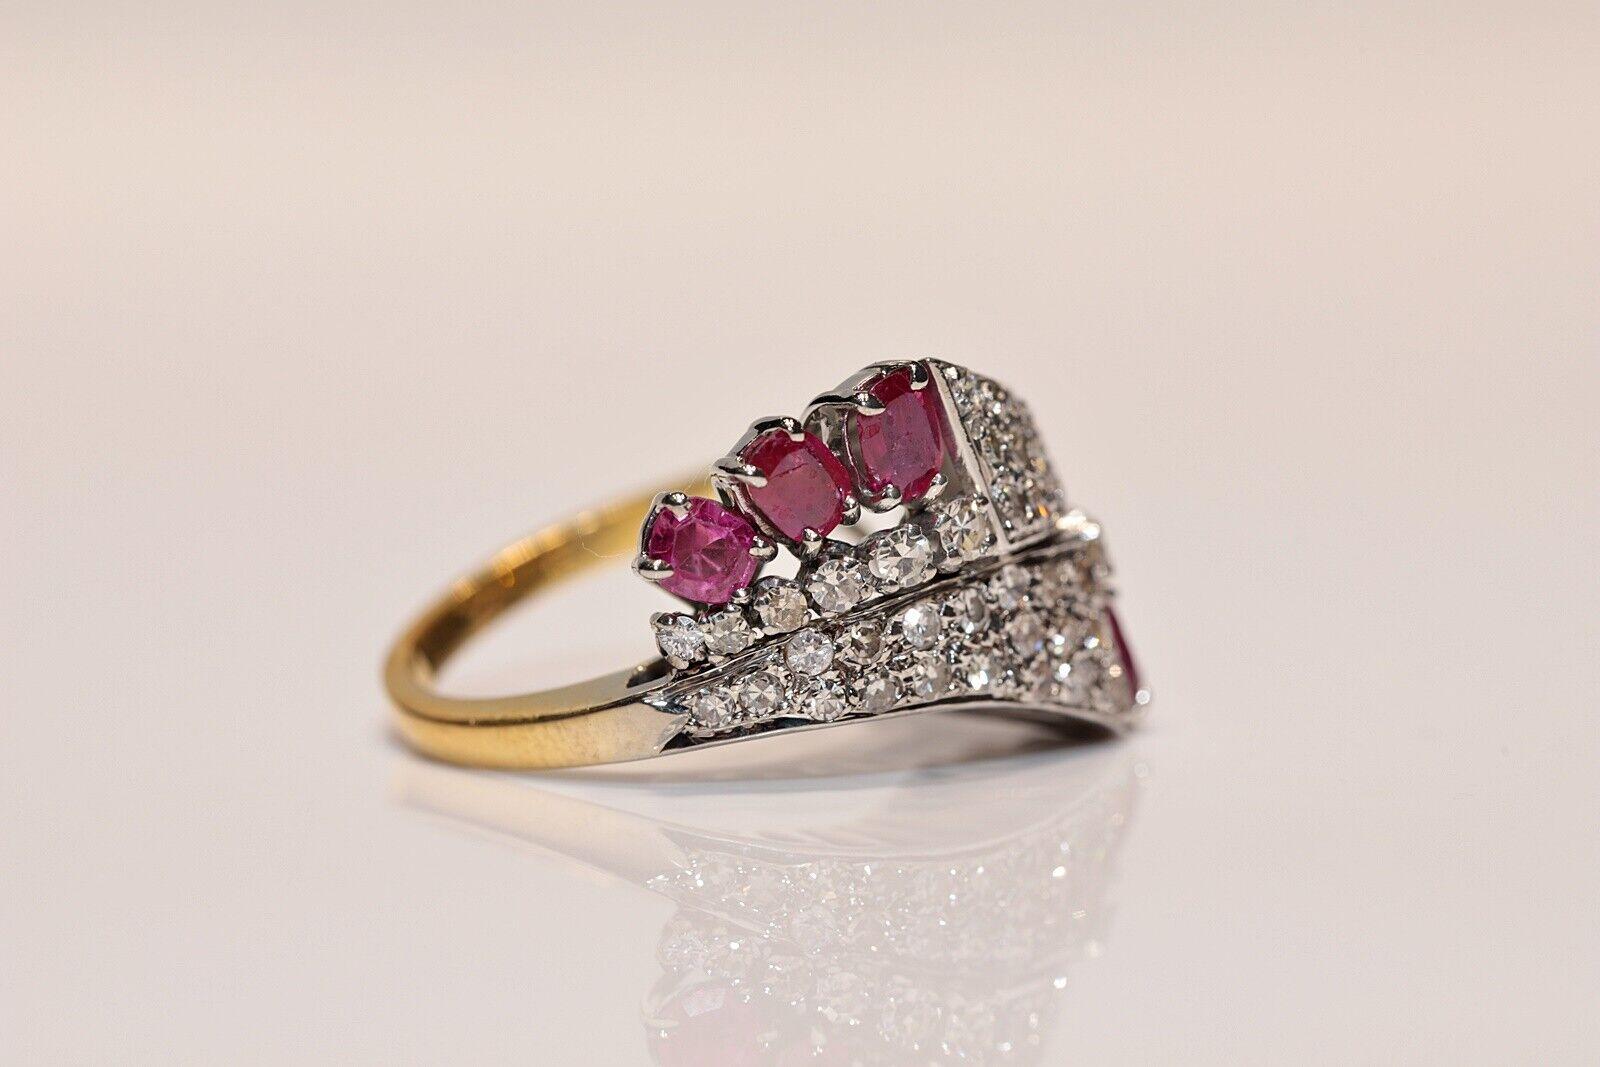 Brilliant Cut Vintage Circa 1970s 14k Gold Natural Diamond And Ruby Decorated Ring For Sale